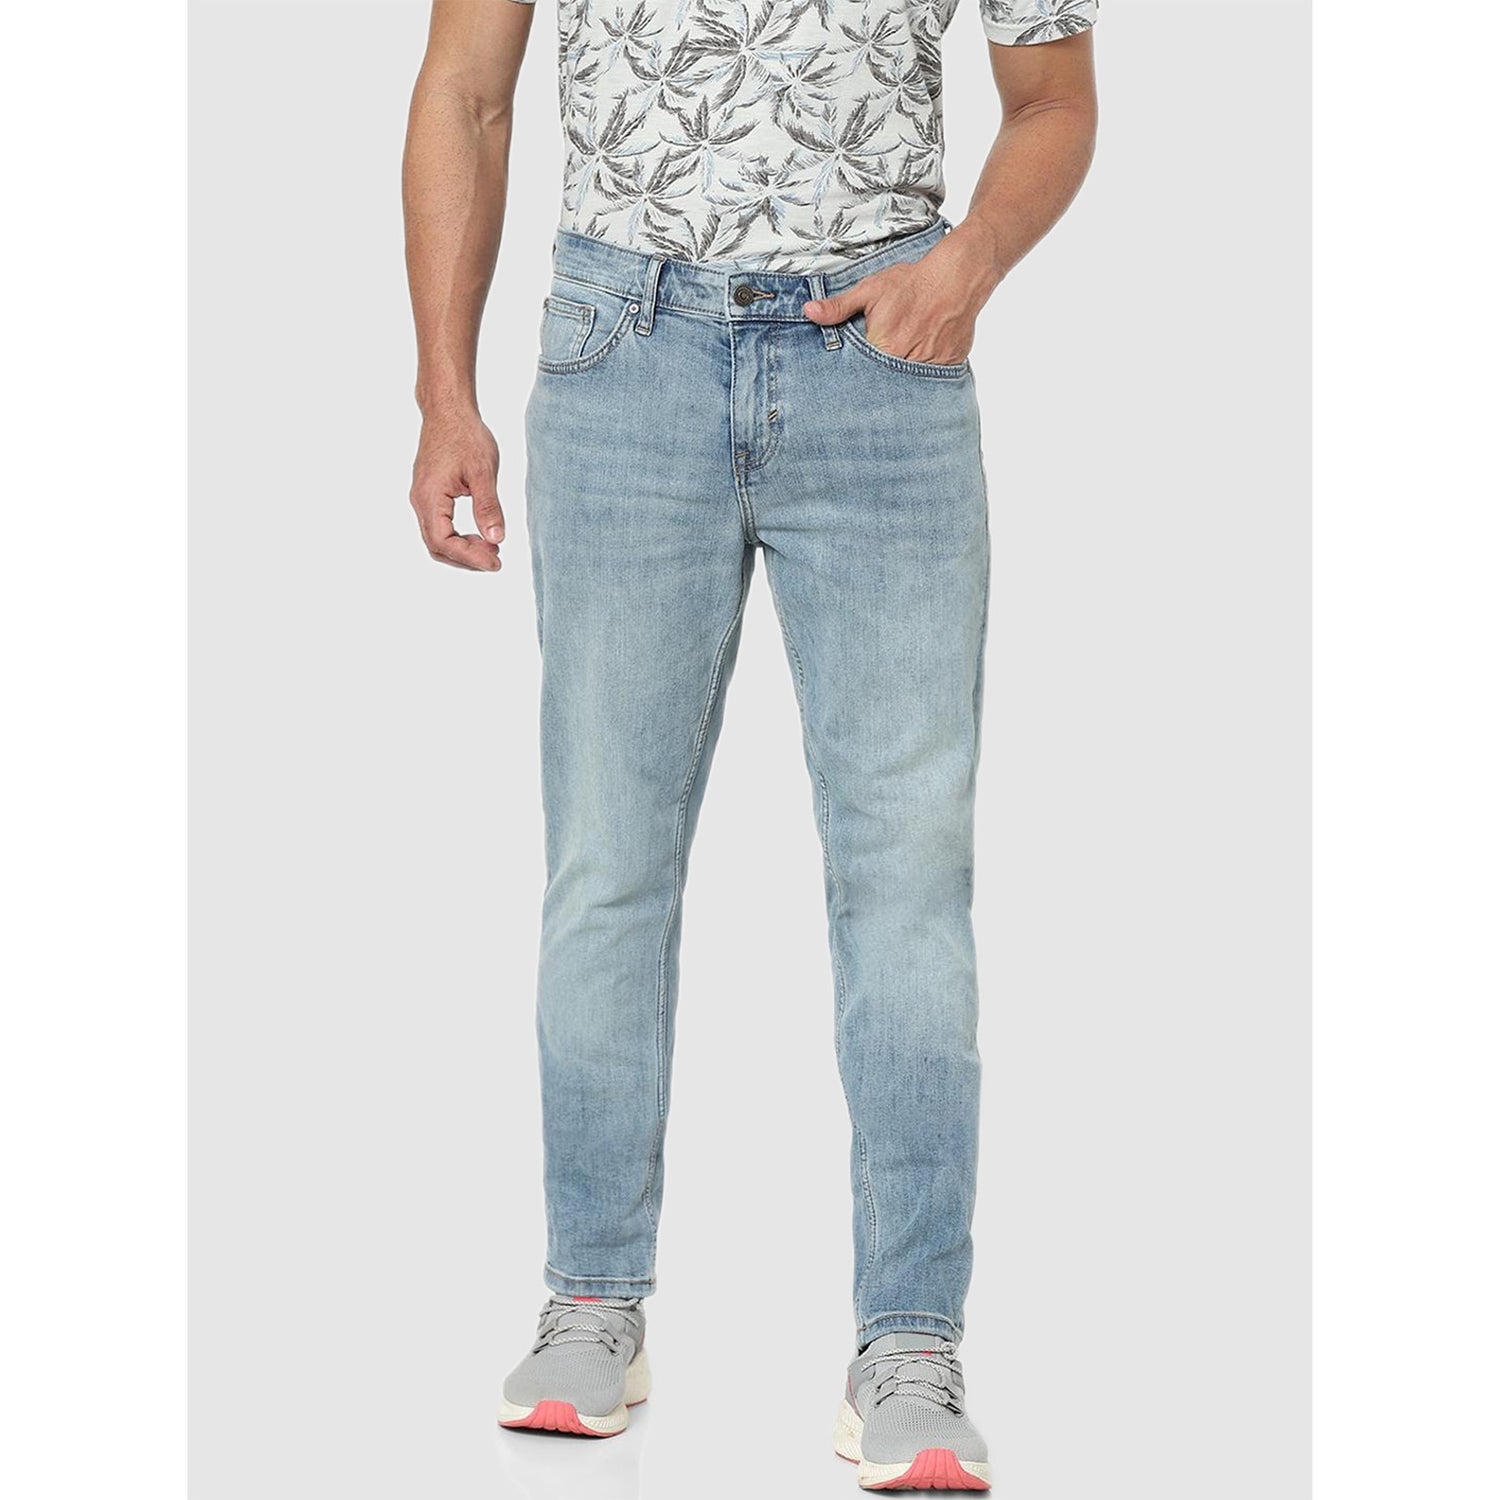 Blue Jean Slim Fit Heavy Fade Stretchable Jeans (VOSLIGHT25)